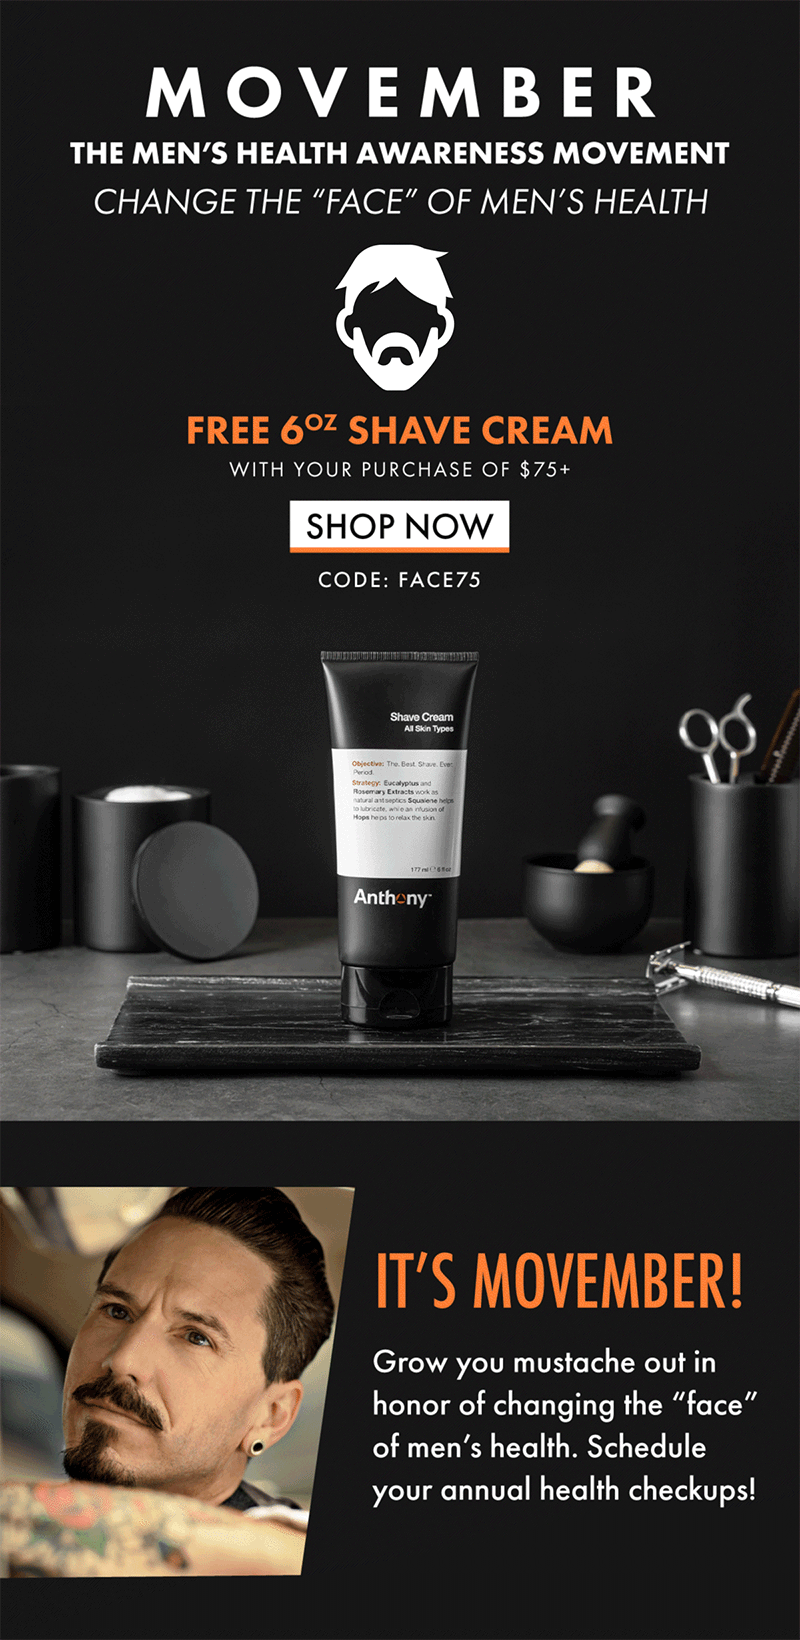 Save before you shave... FREE 6oz shave cream: code face75